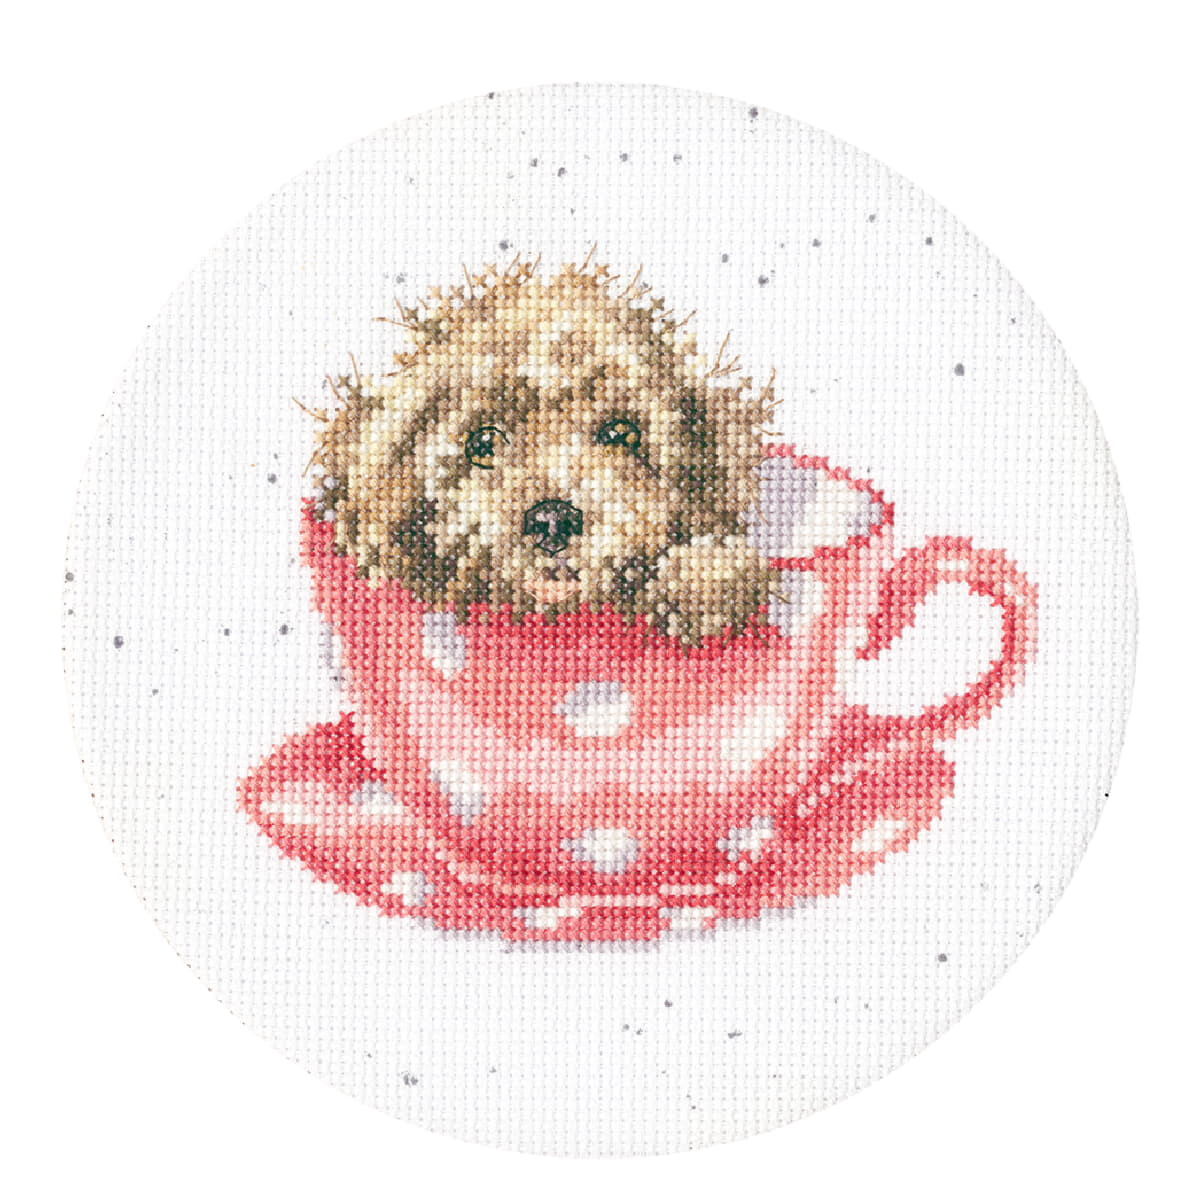 Bothy Threads counted cross stitch kit "Teacup...